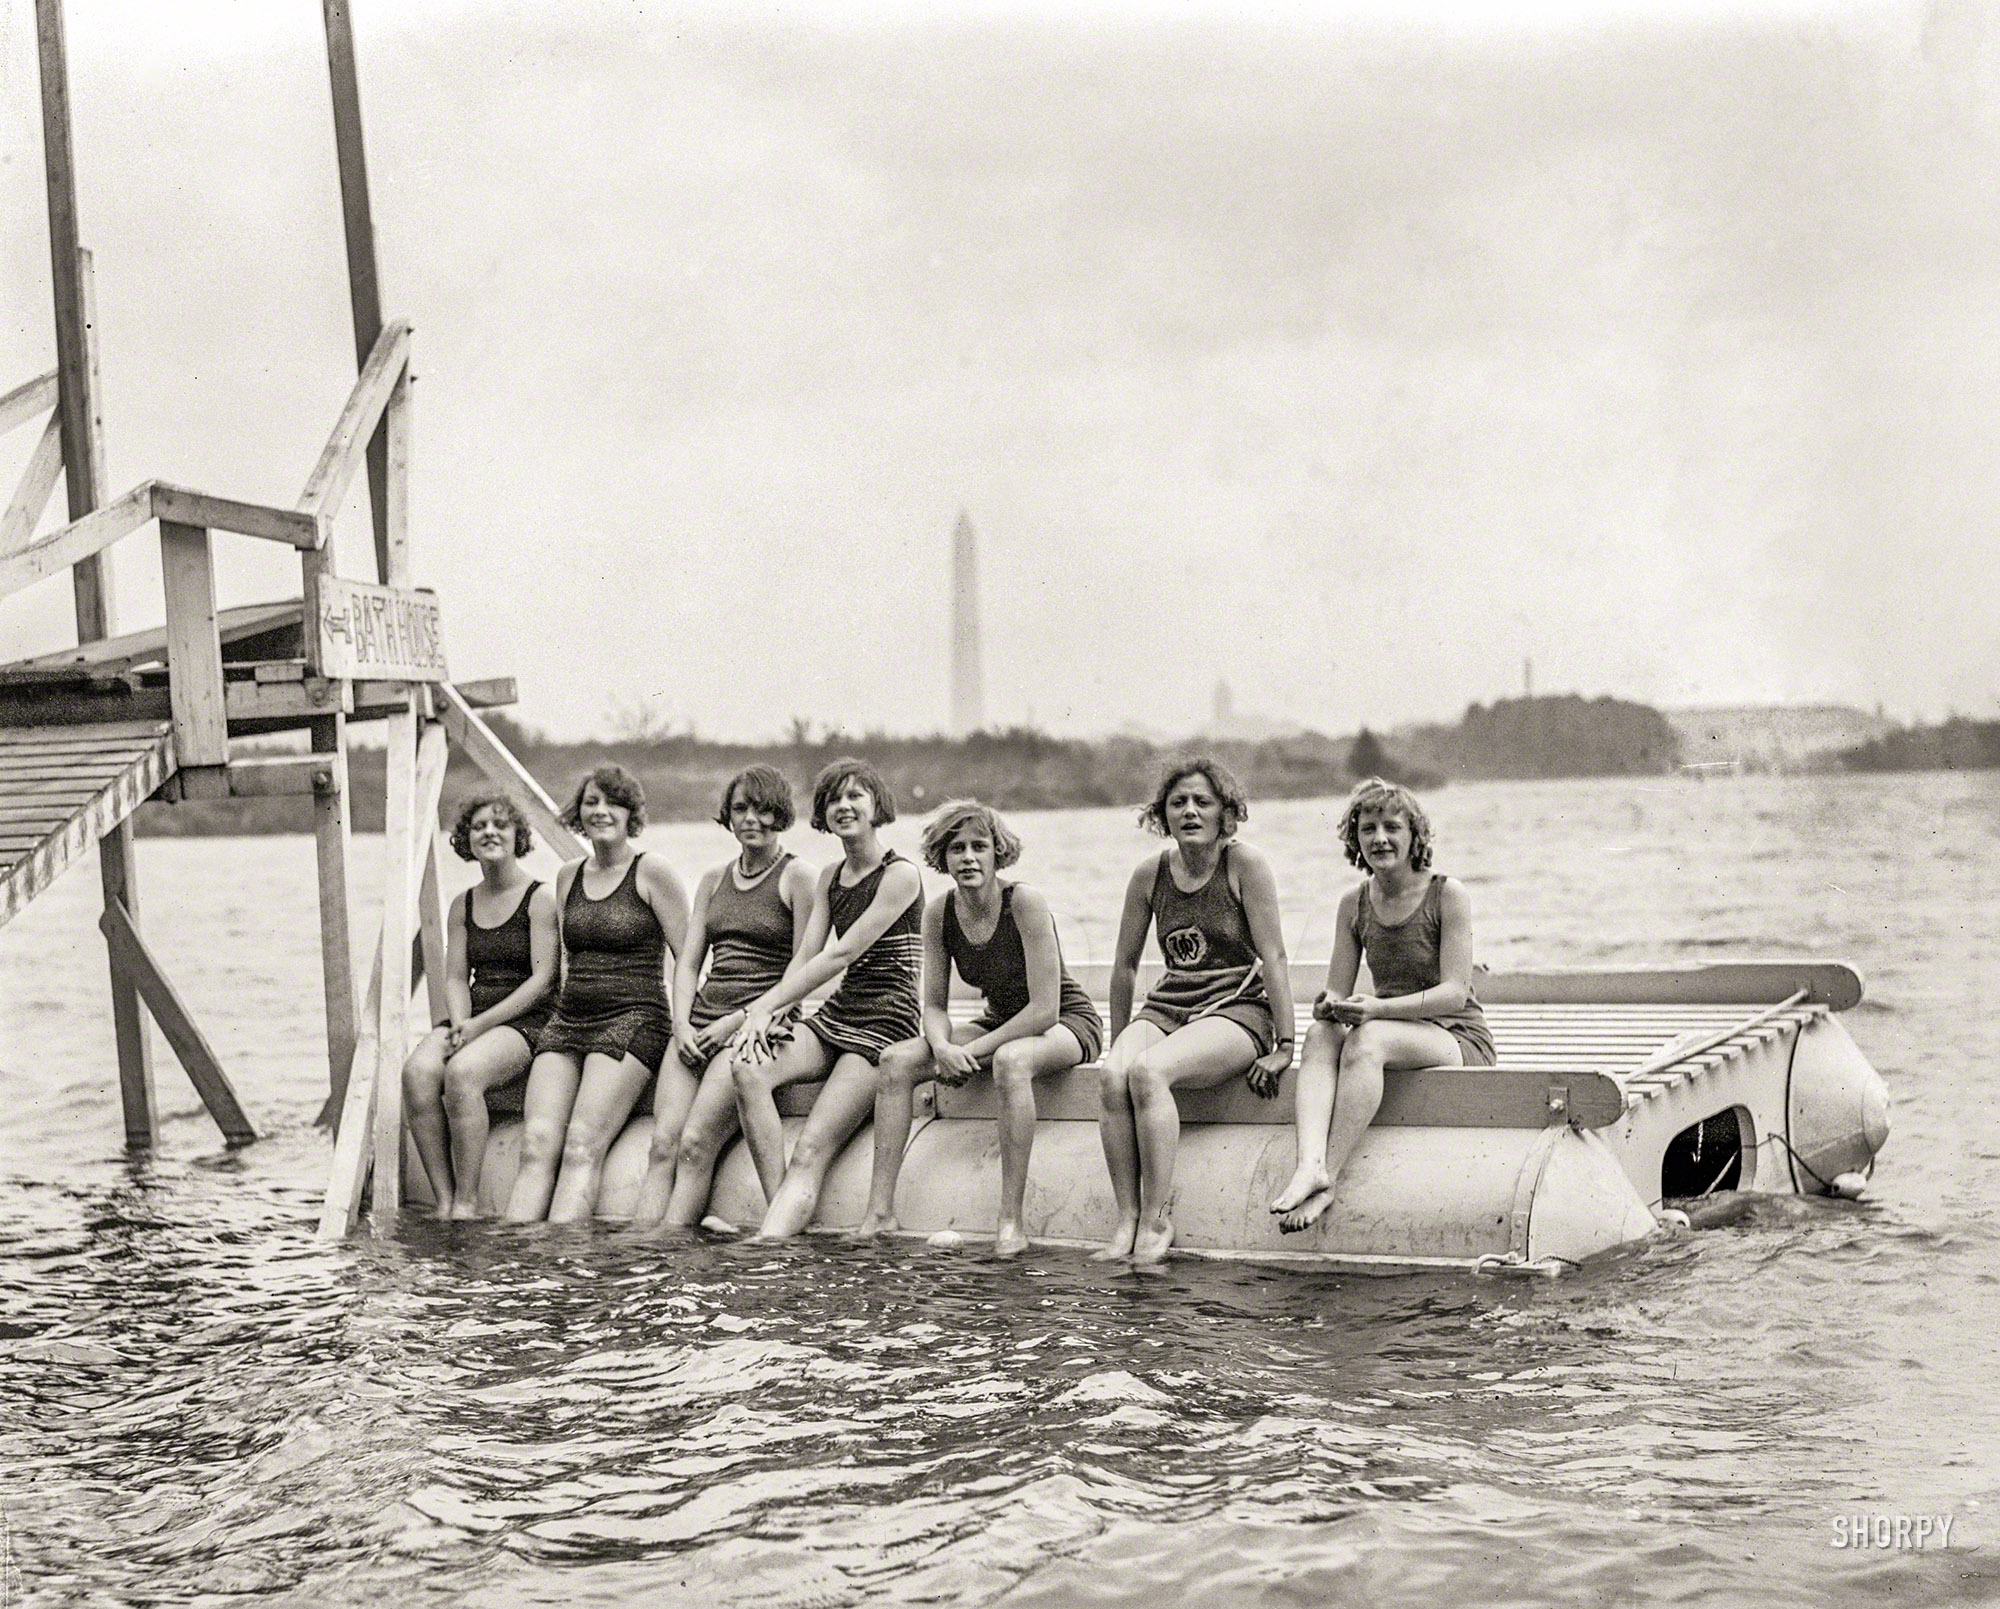 April 29, 1925. "Girls from Keith's [vaudeville theater] at Arlington Beach." National Photo Company Collection glass negative. View full size.